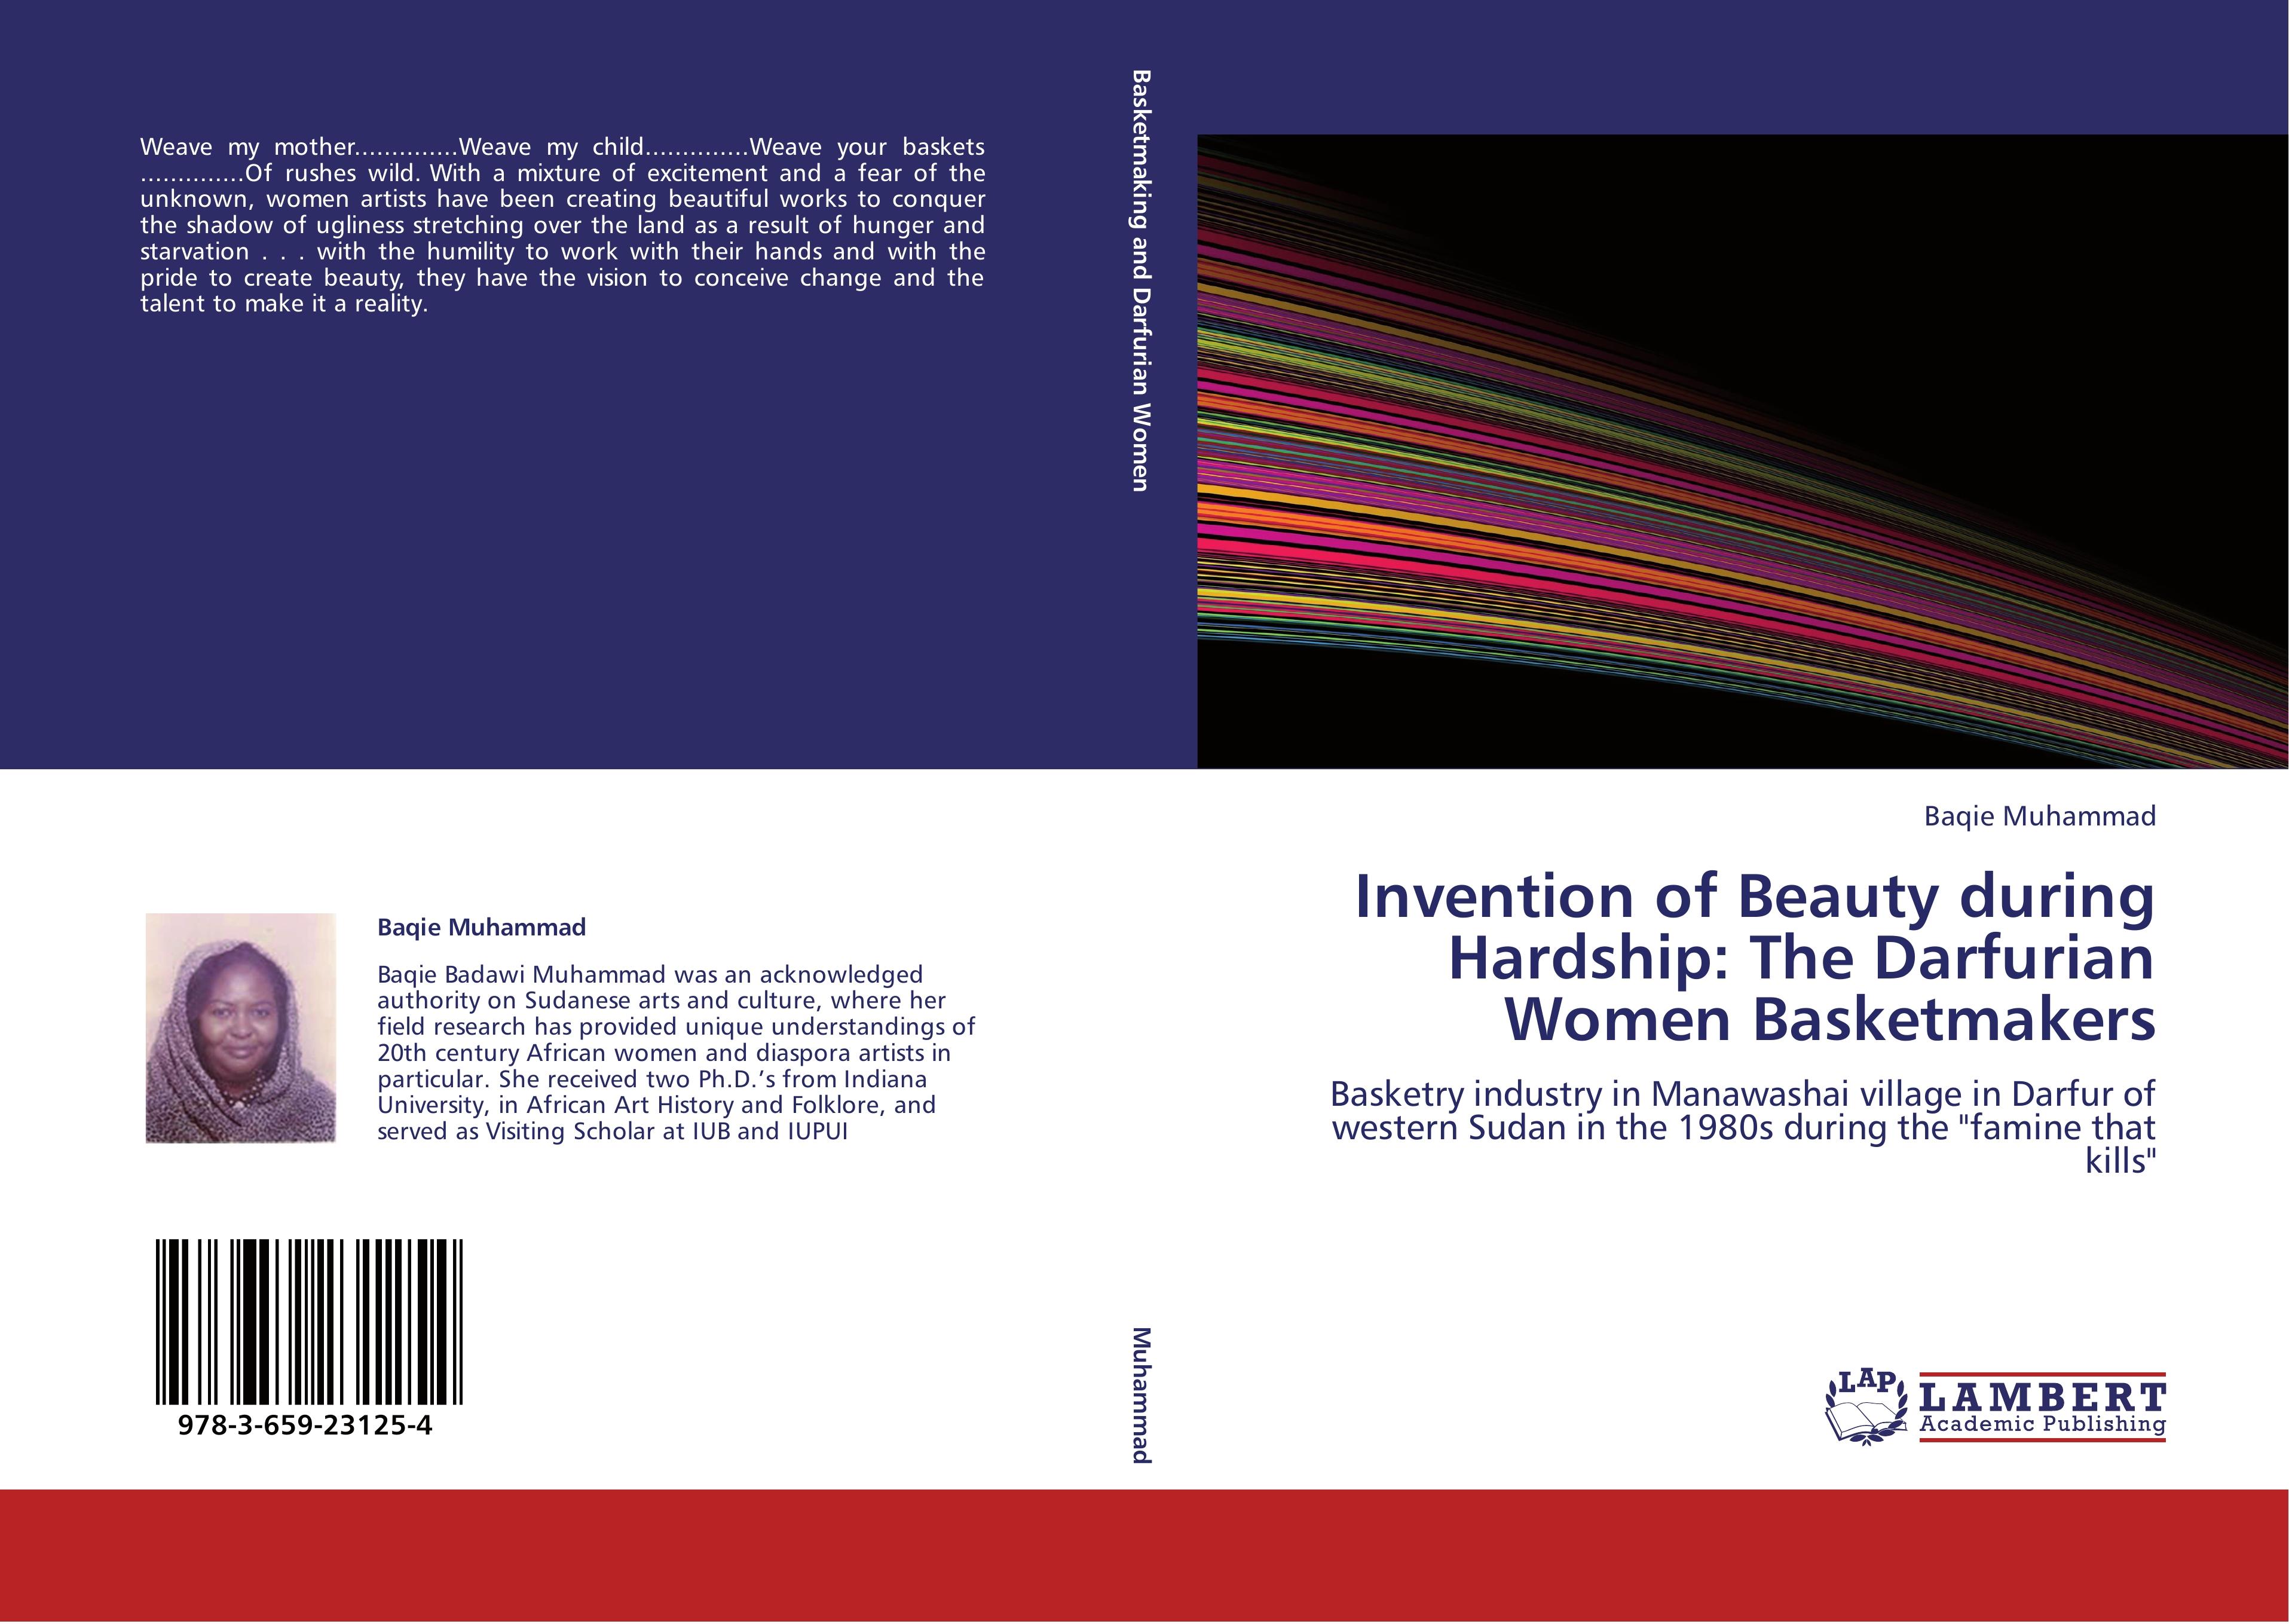 Invention of Beauty during Hardship: The Darfurian Women Basketmakers - Baqie Muhammad